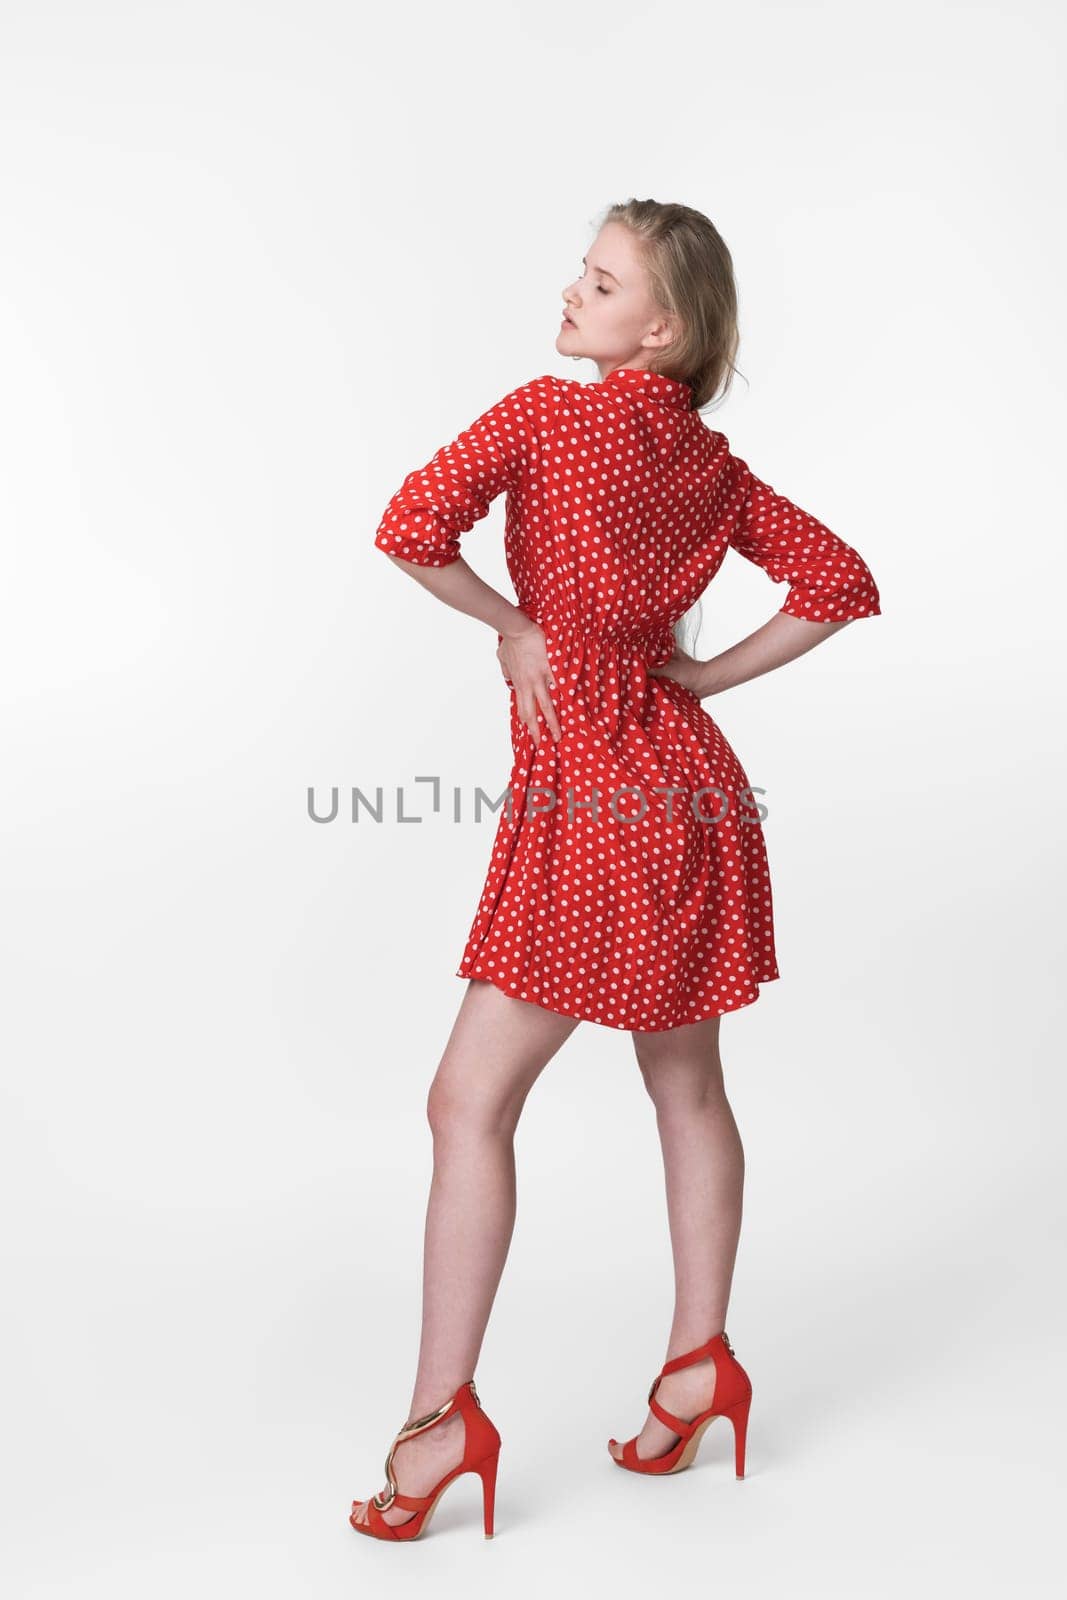 Cheerful blonde woman with closed eyes dressed in summer red polka dot dress, red shoes standing in full length and poses. Bossy European female 21 years old. Studio shot on white background